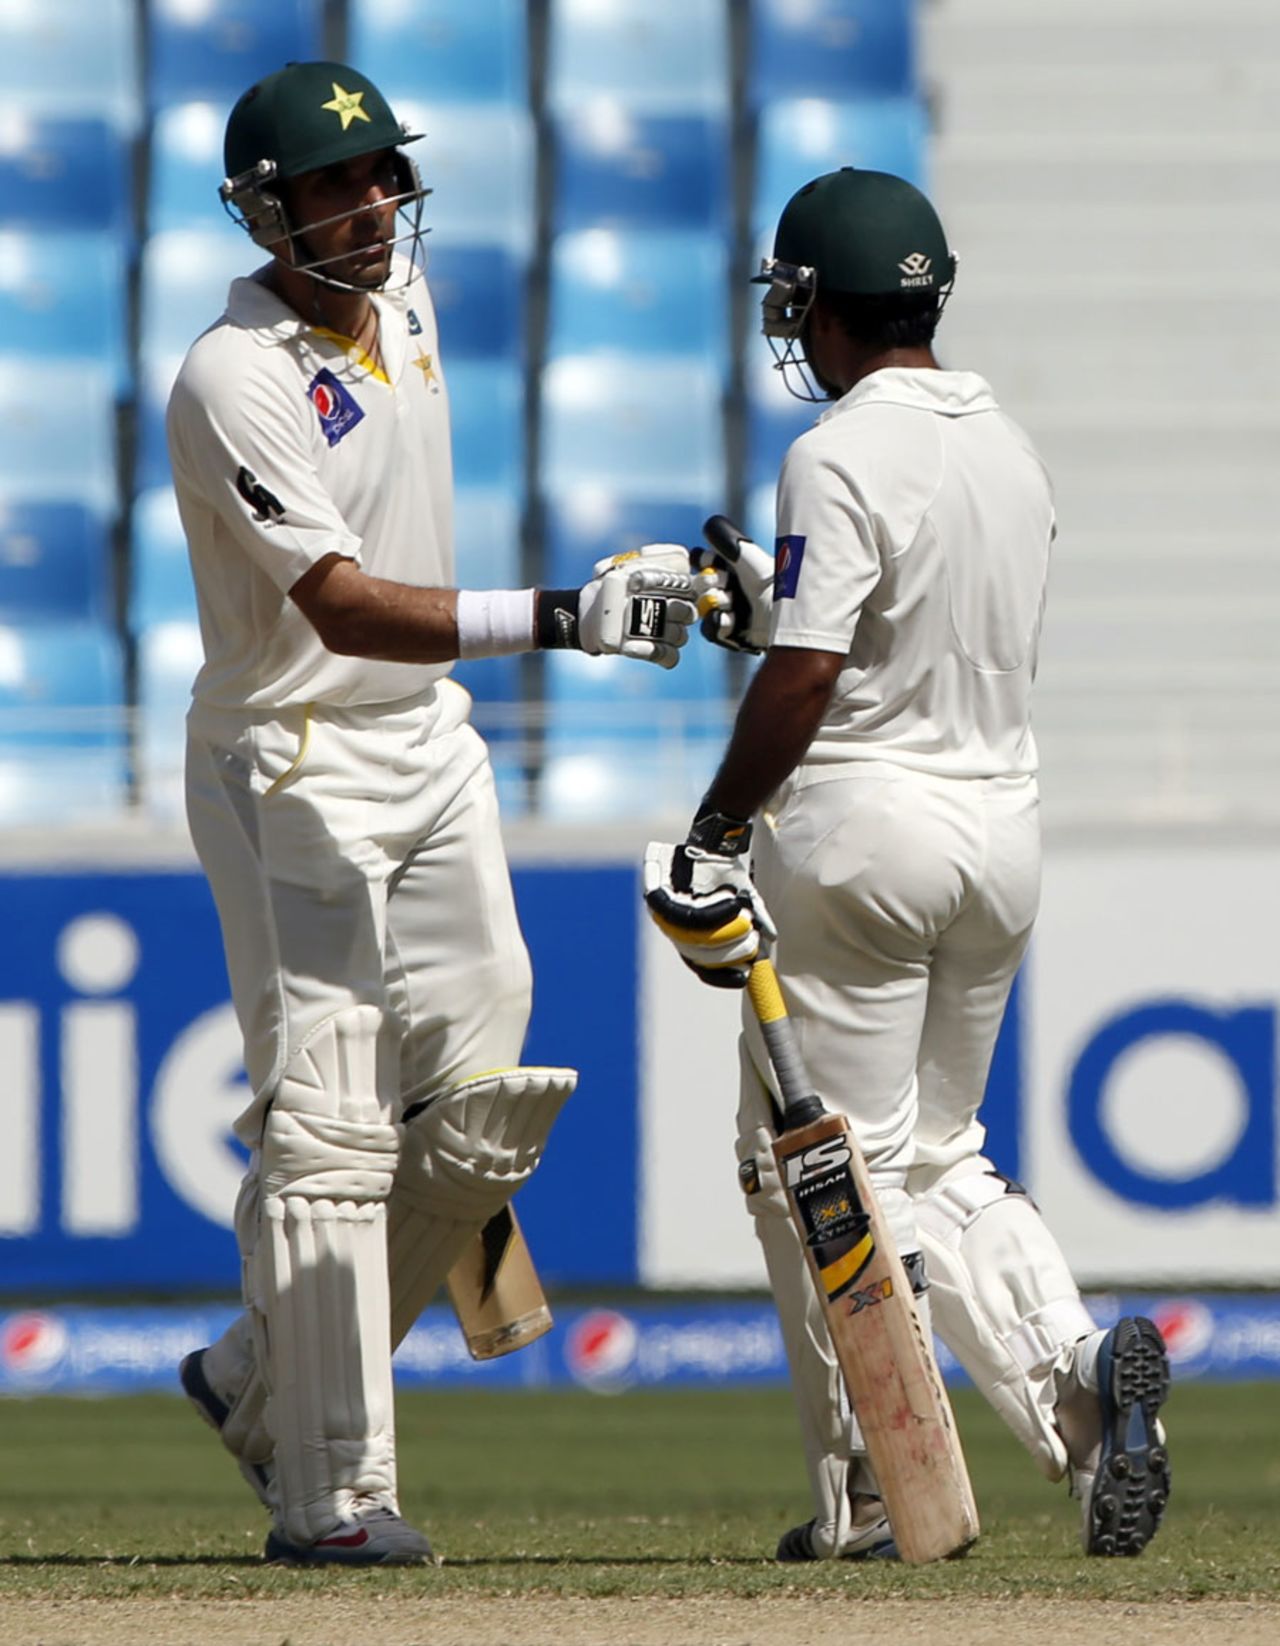 Misbah-ul-Haq and Asad Shafiq added 93 for the fifth wicket, Pakistan v Australia, 1st Test, Dubai, 2nd day, October 23, 2014